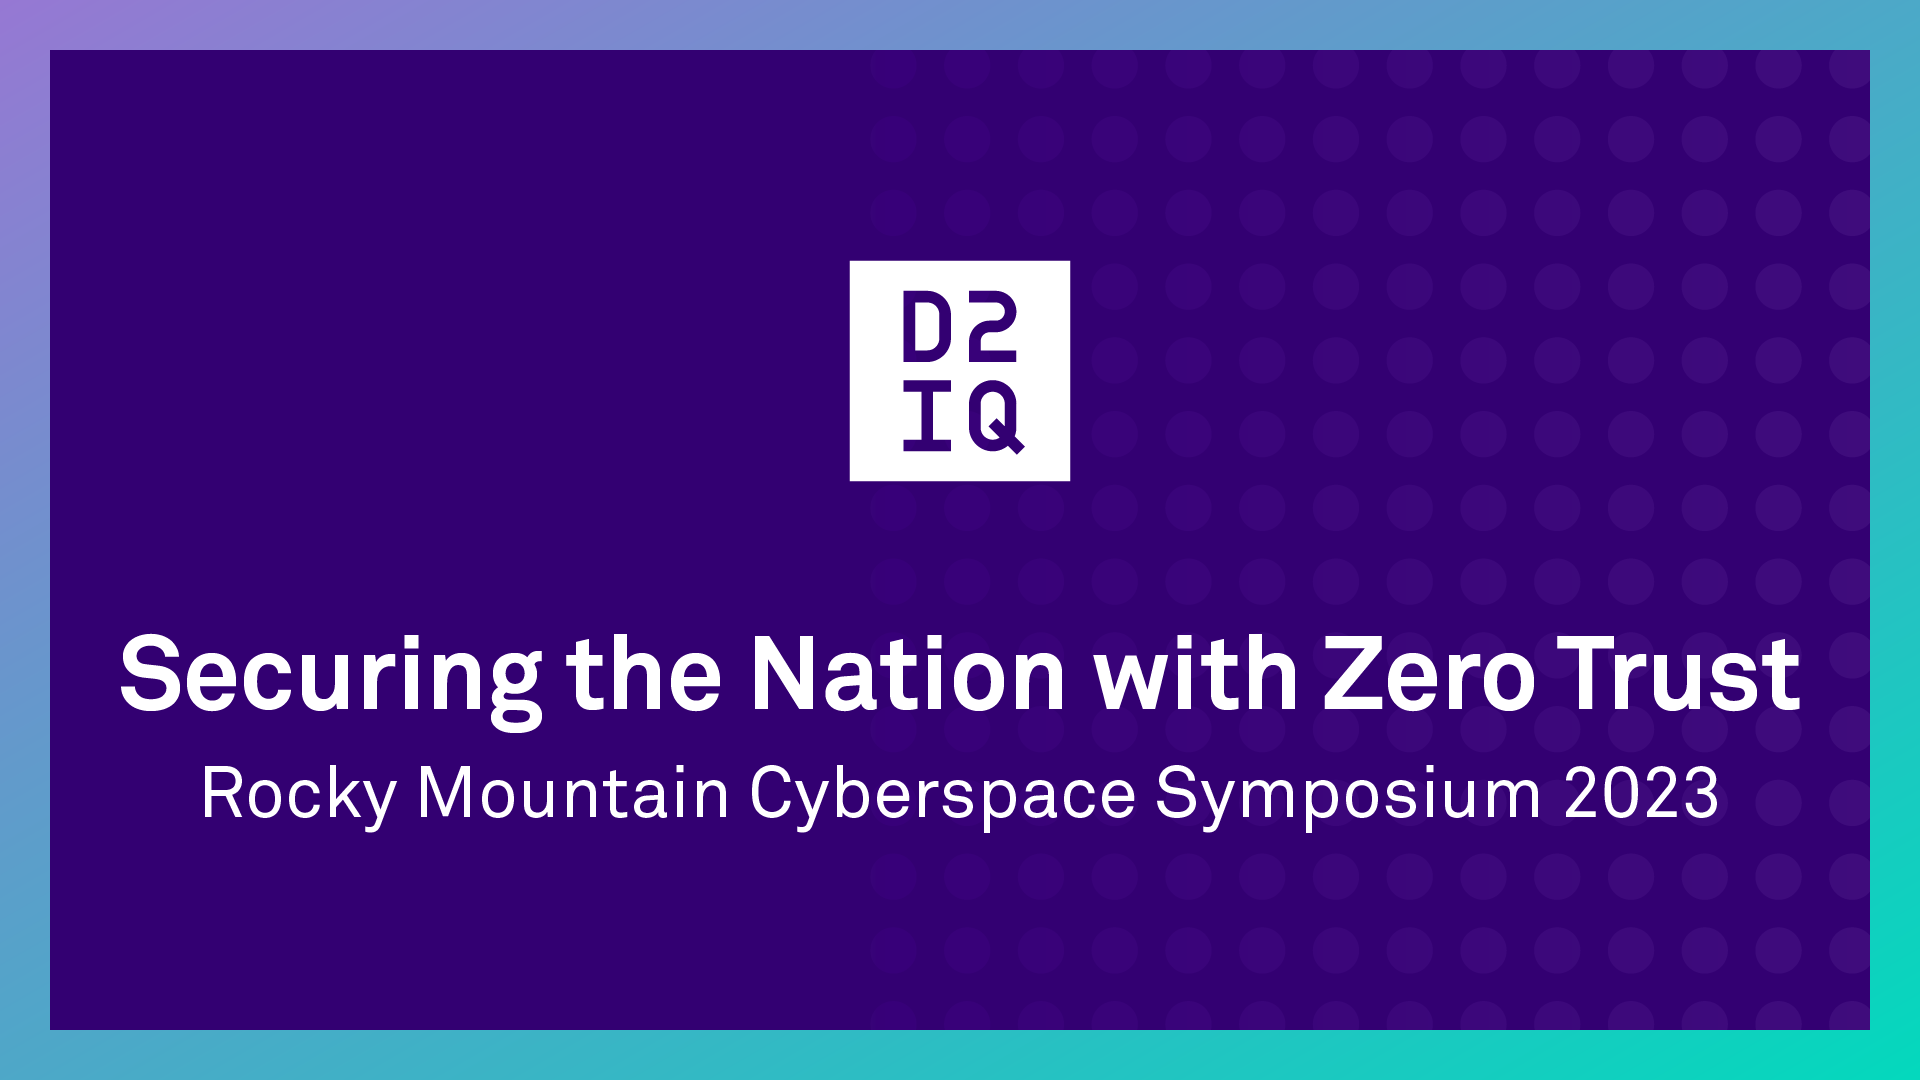 Securing the Nation with Zero Trust: Rocky Mountain Cyberspace Symposium 2023